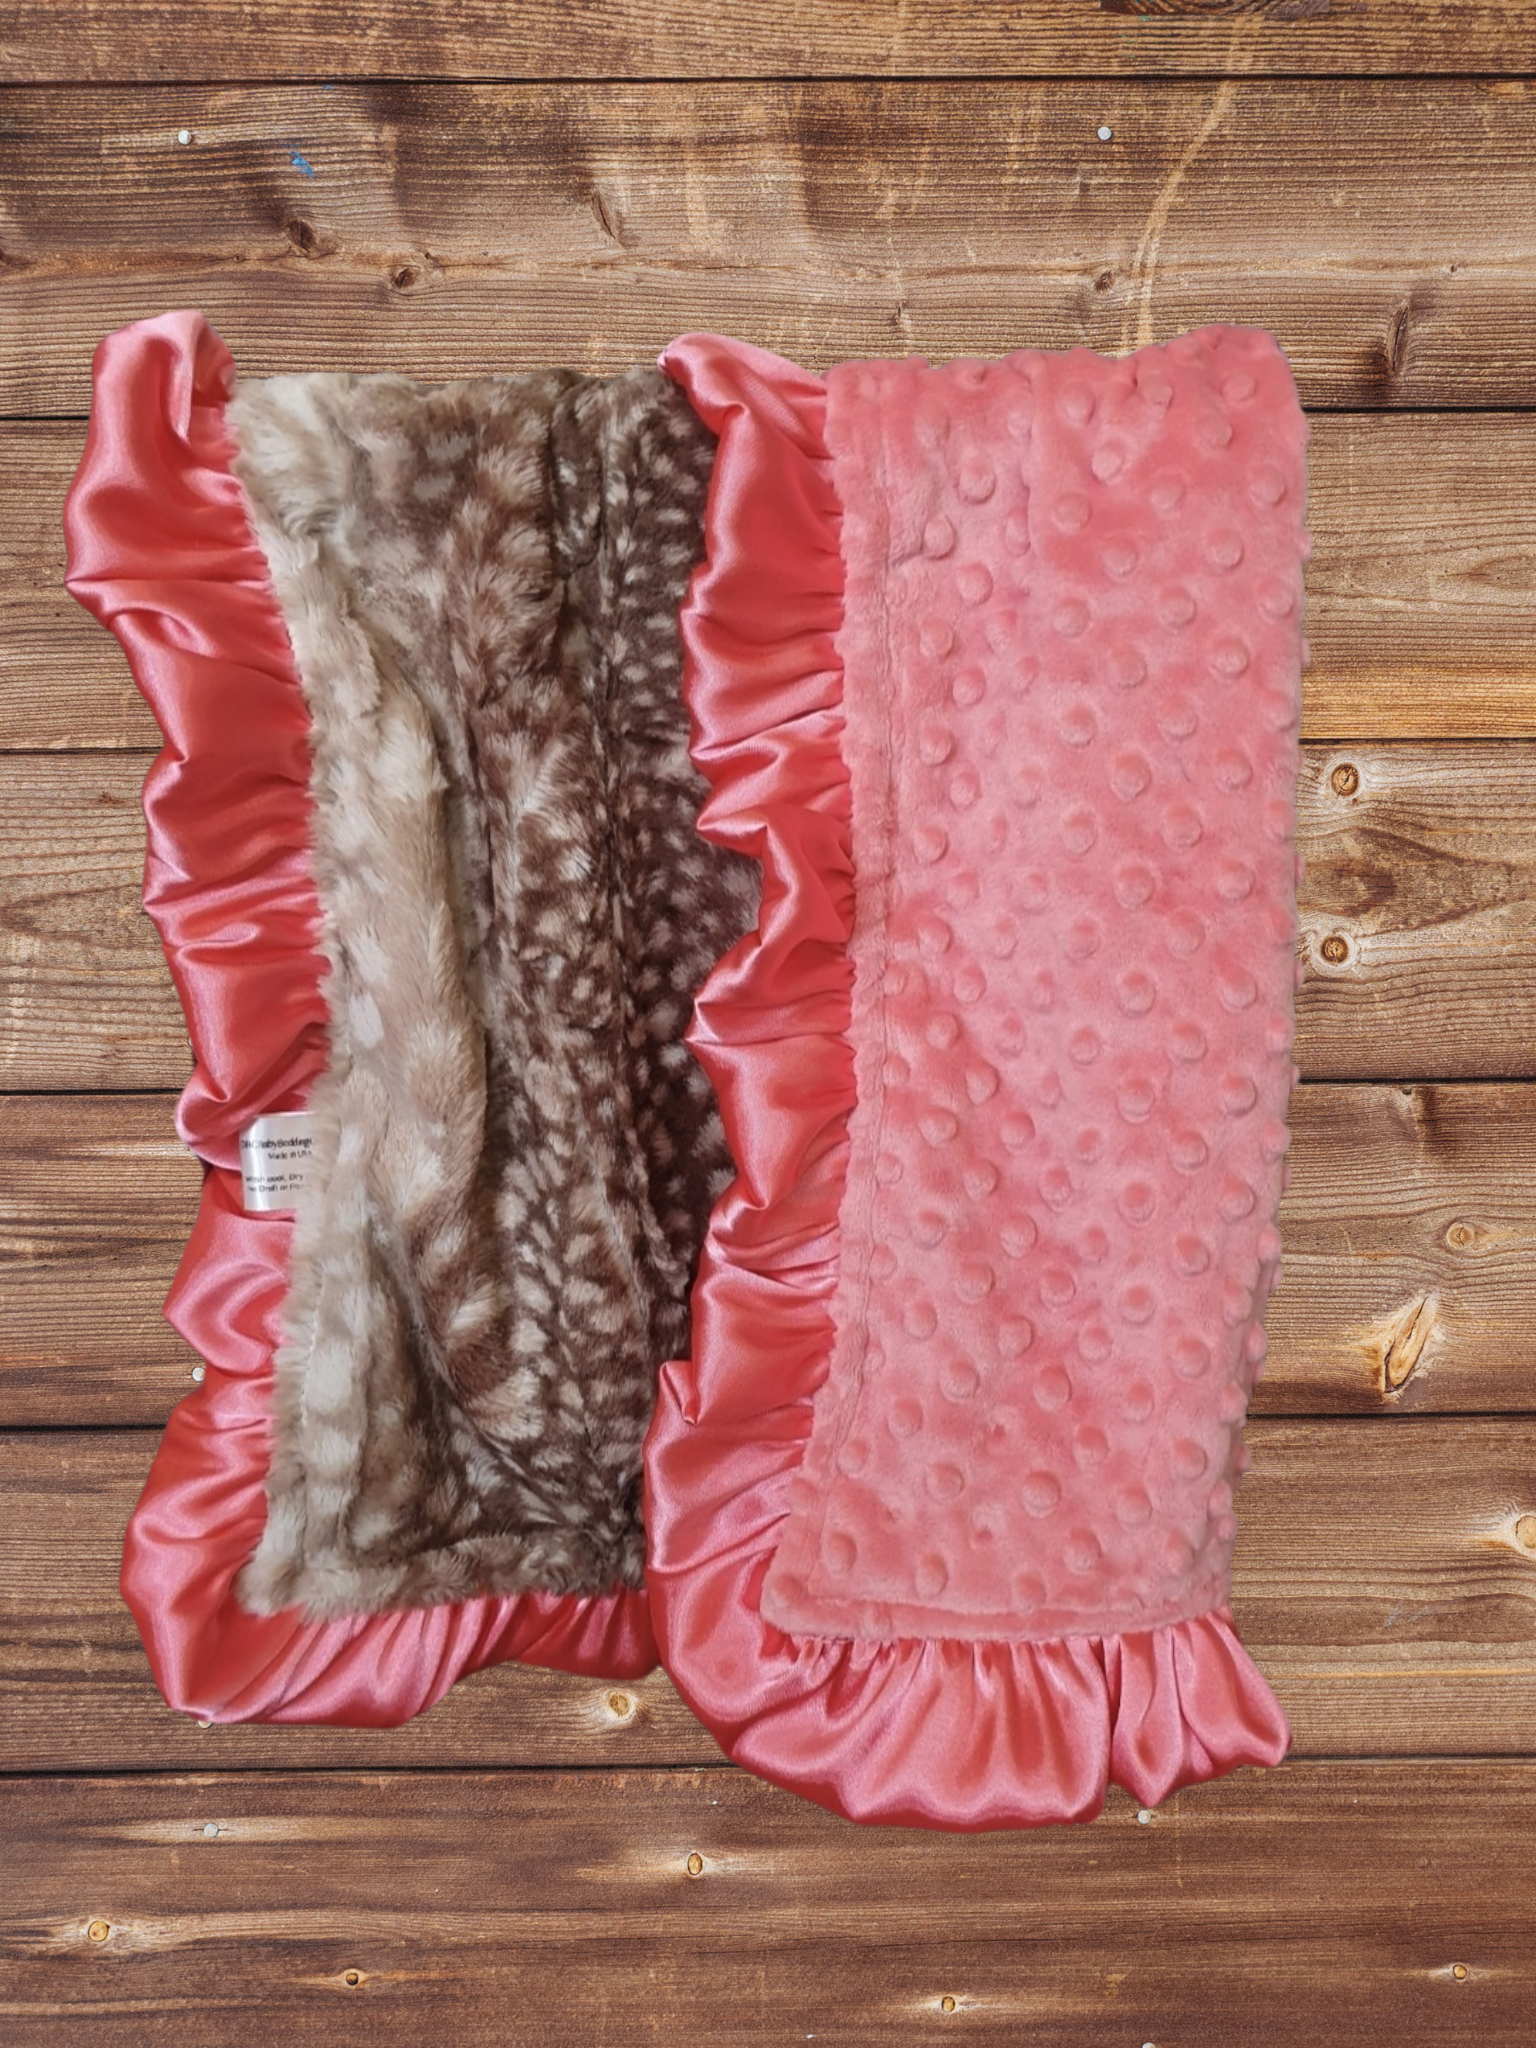 Baby Ruffle Lovey - Fawn Minky and Coral Woodland Lovey - DBC Baby Bedding Co 